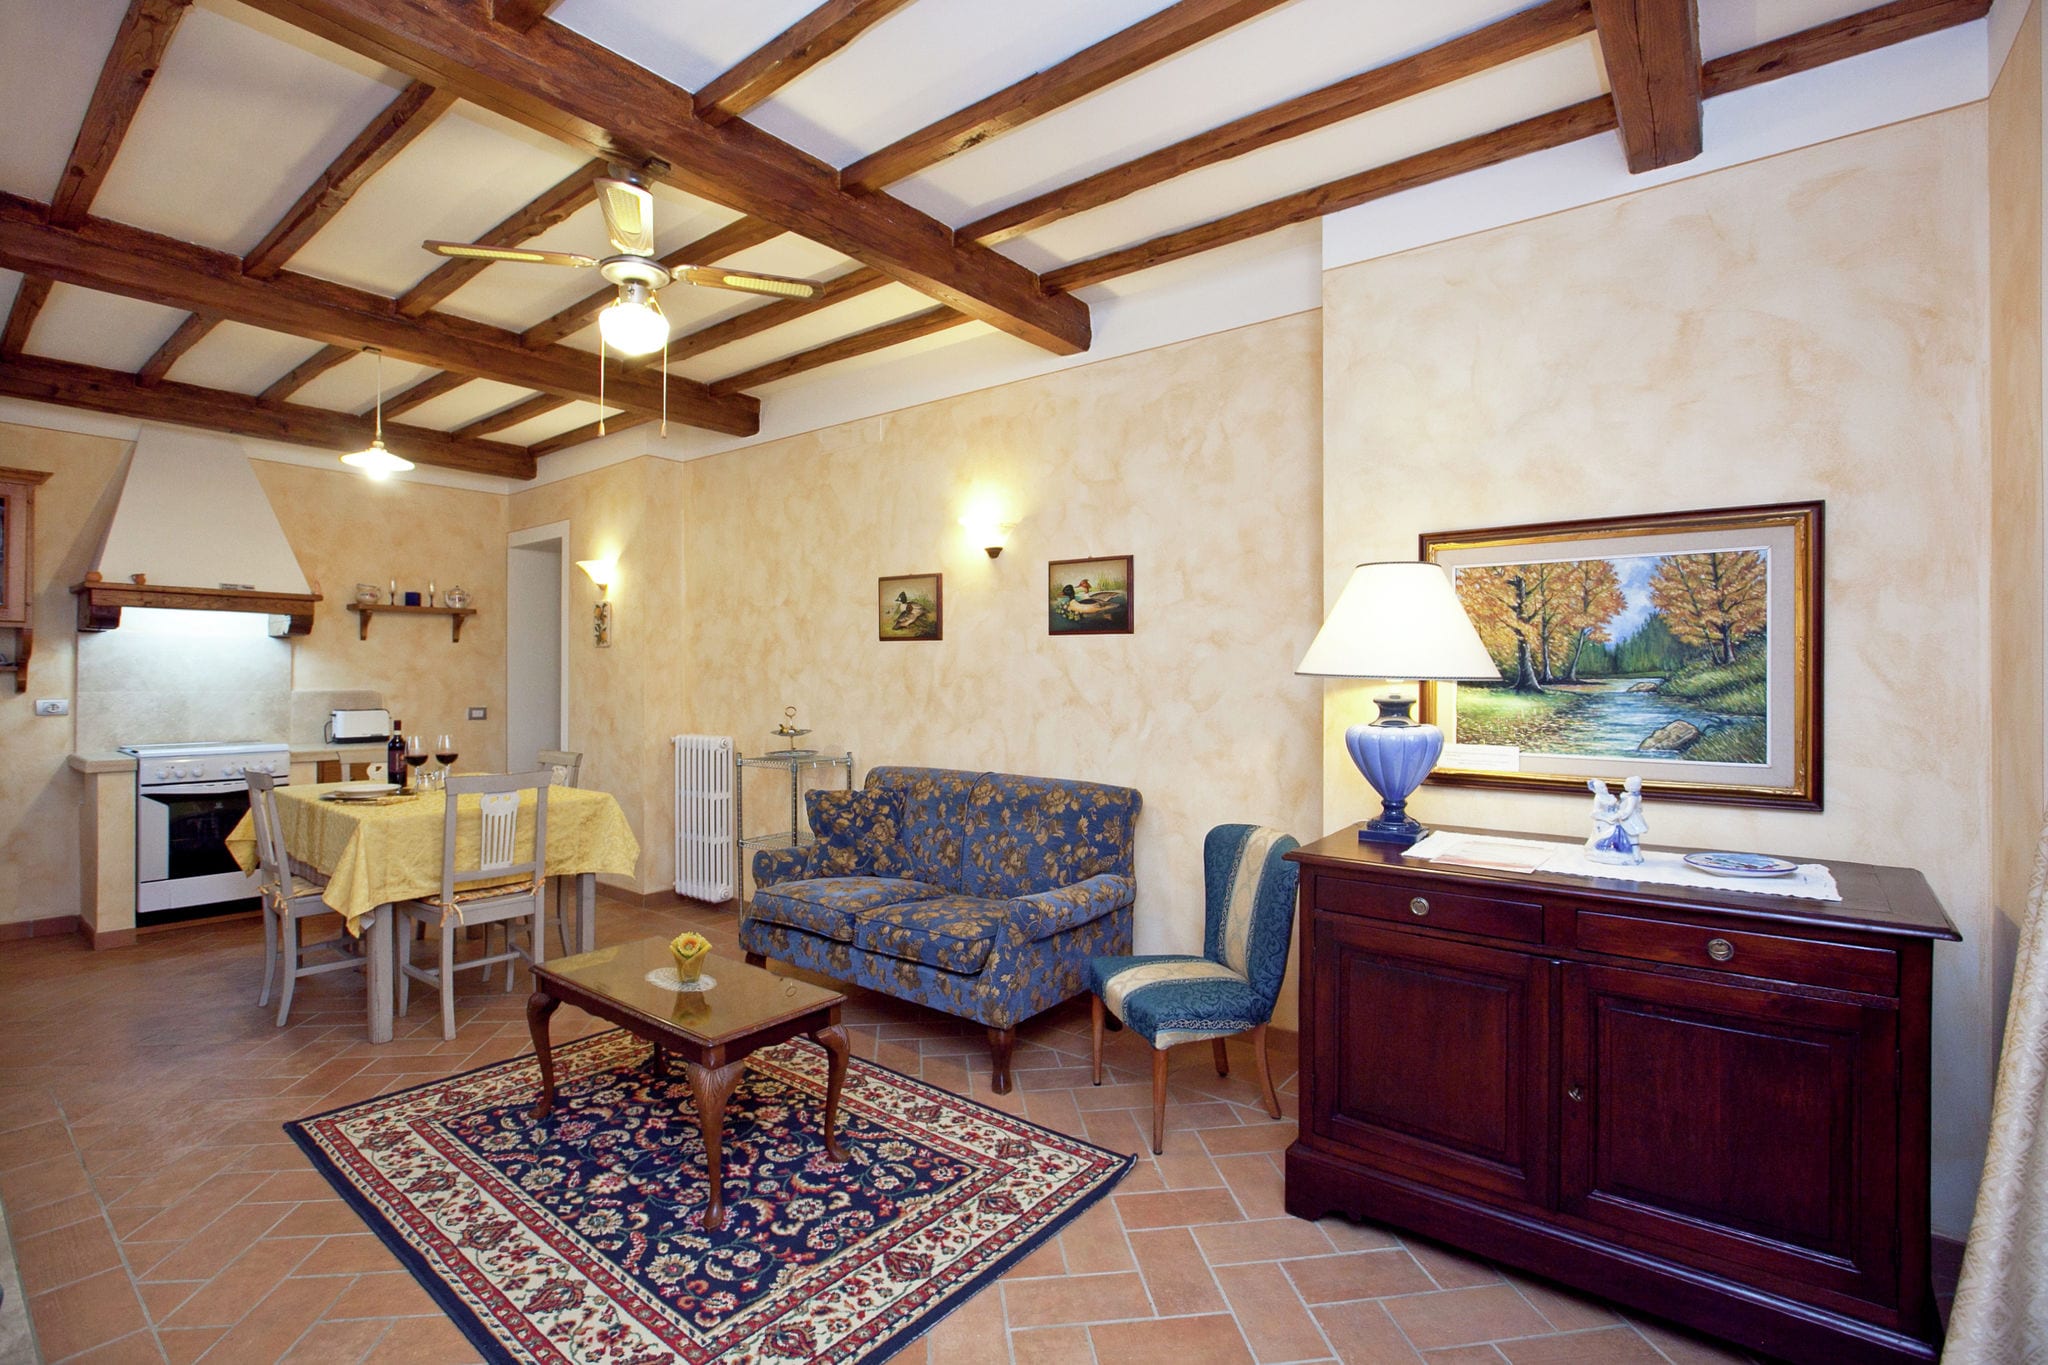 Apartment in Tuscan style with view of the hills and near a village